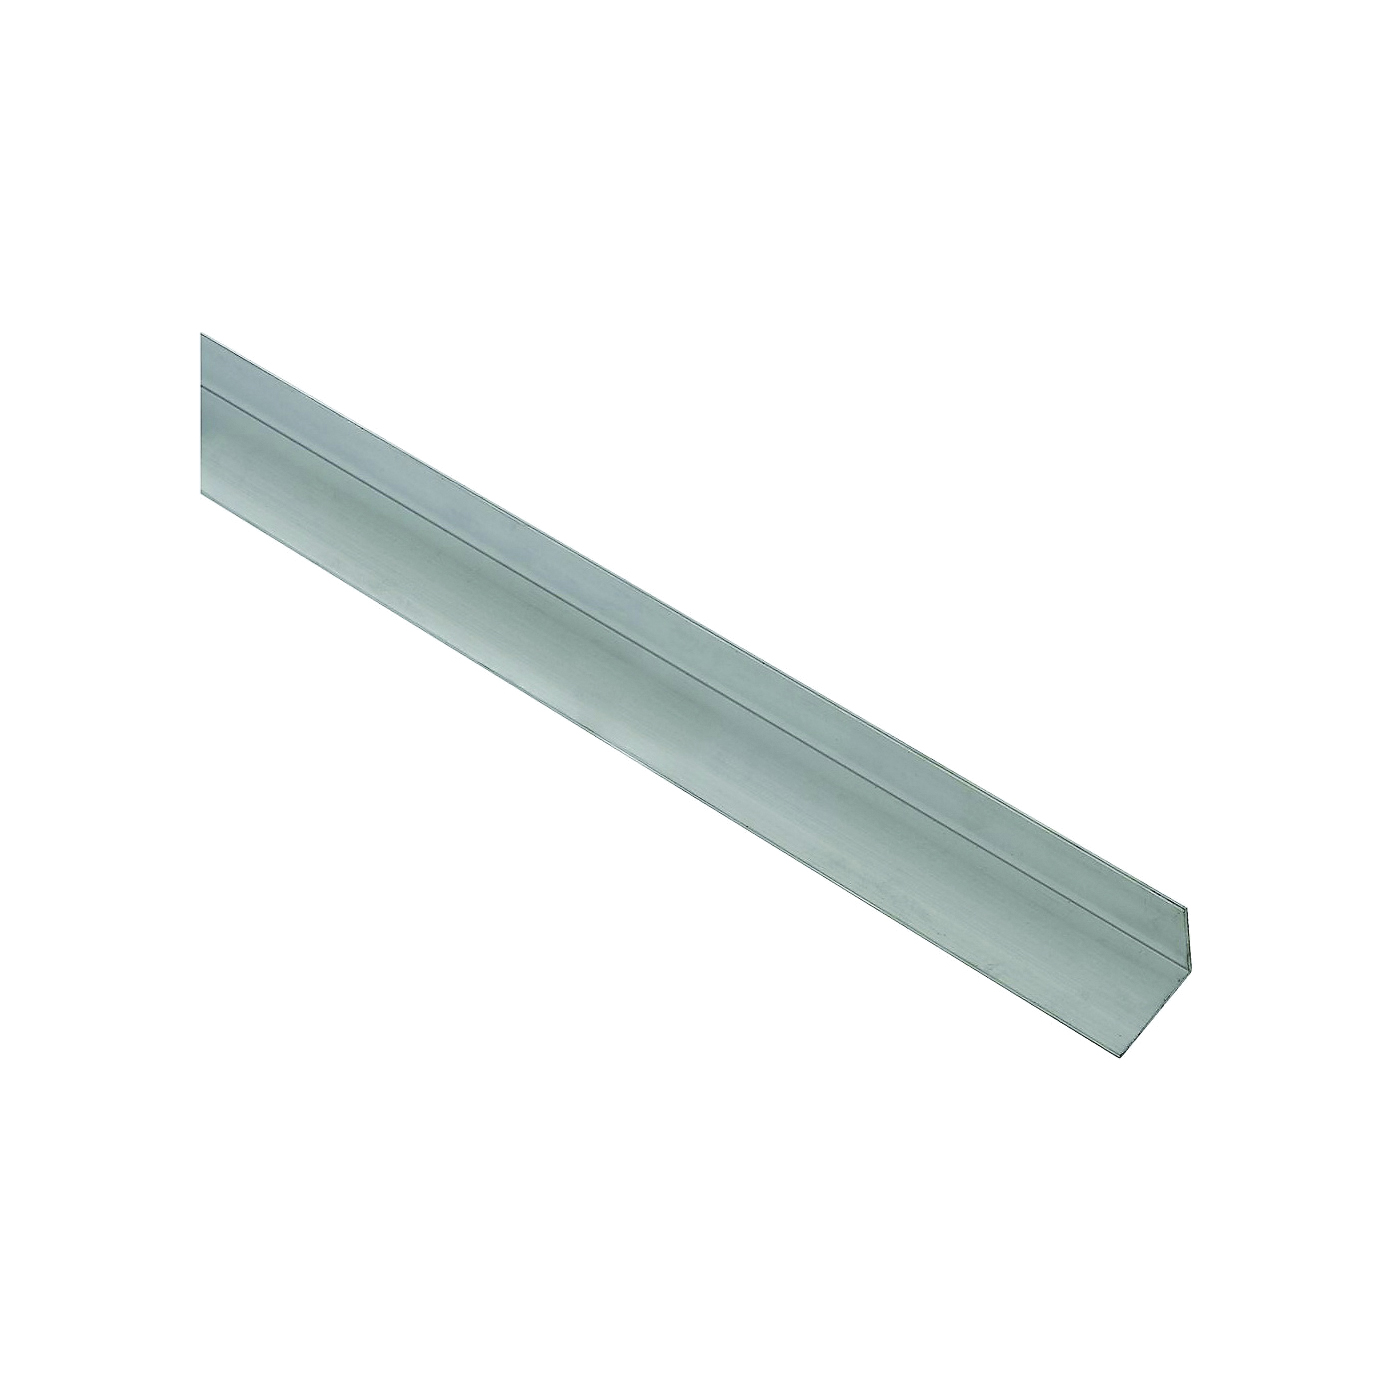 4203BC Series N247-353 Angle Stock, 1-1/2 in L Leg, 48 in L, 1/16 in Thick, Aluminum, Mill